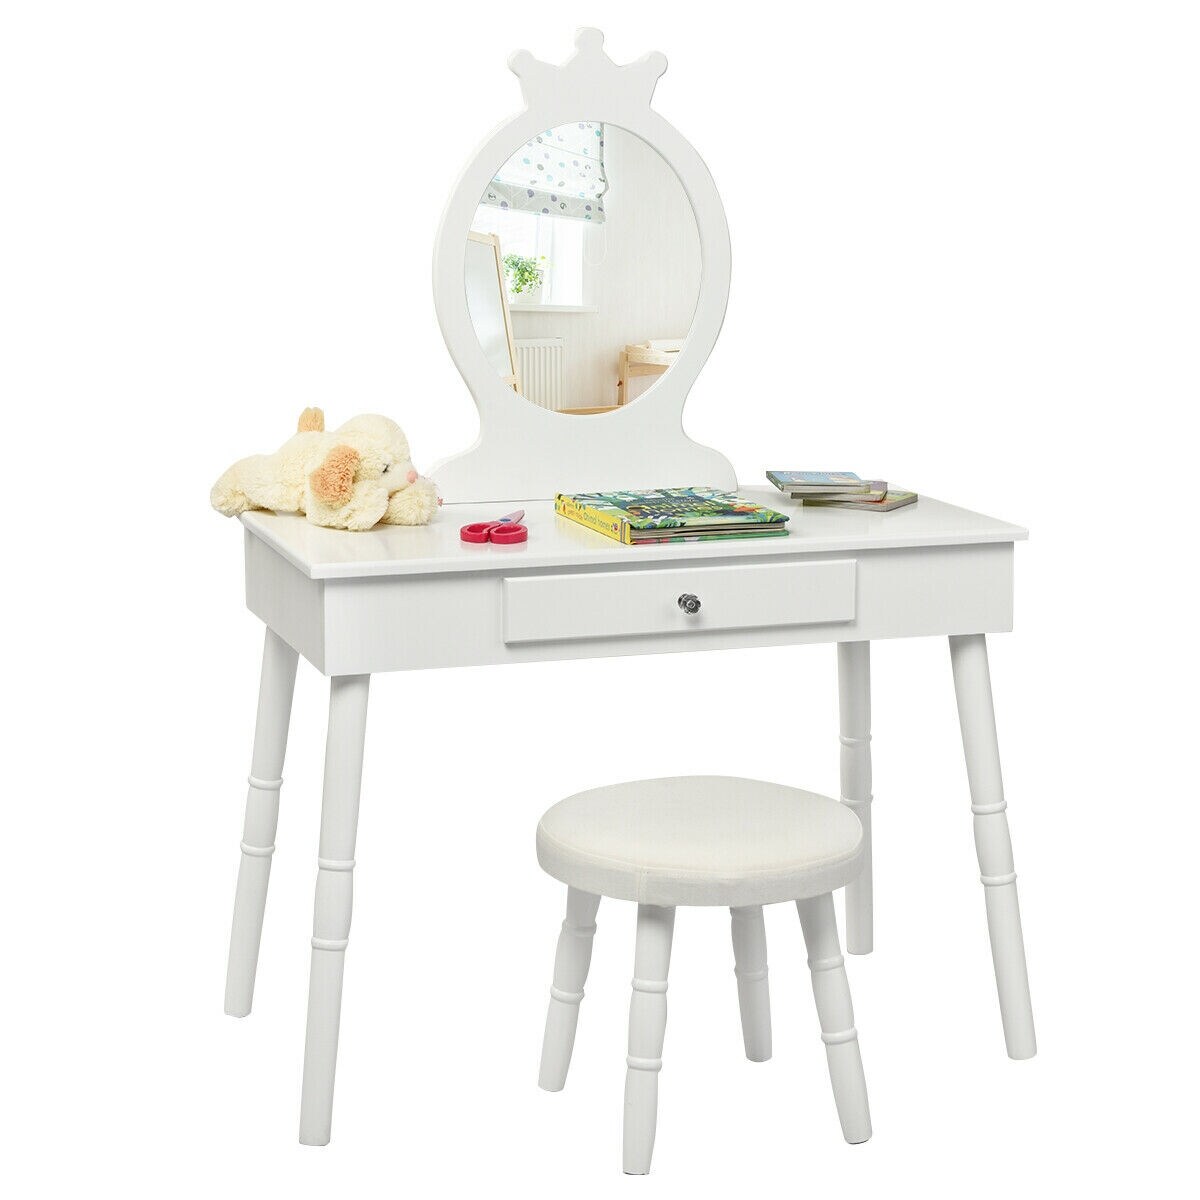 Gymax Kids Vanity Makeup Table Chair Set Make Up Stool Play Set For On Sale Overstock 32084718